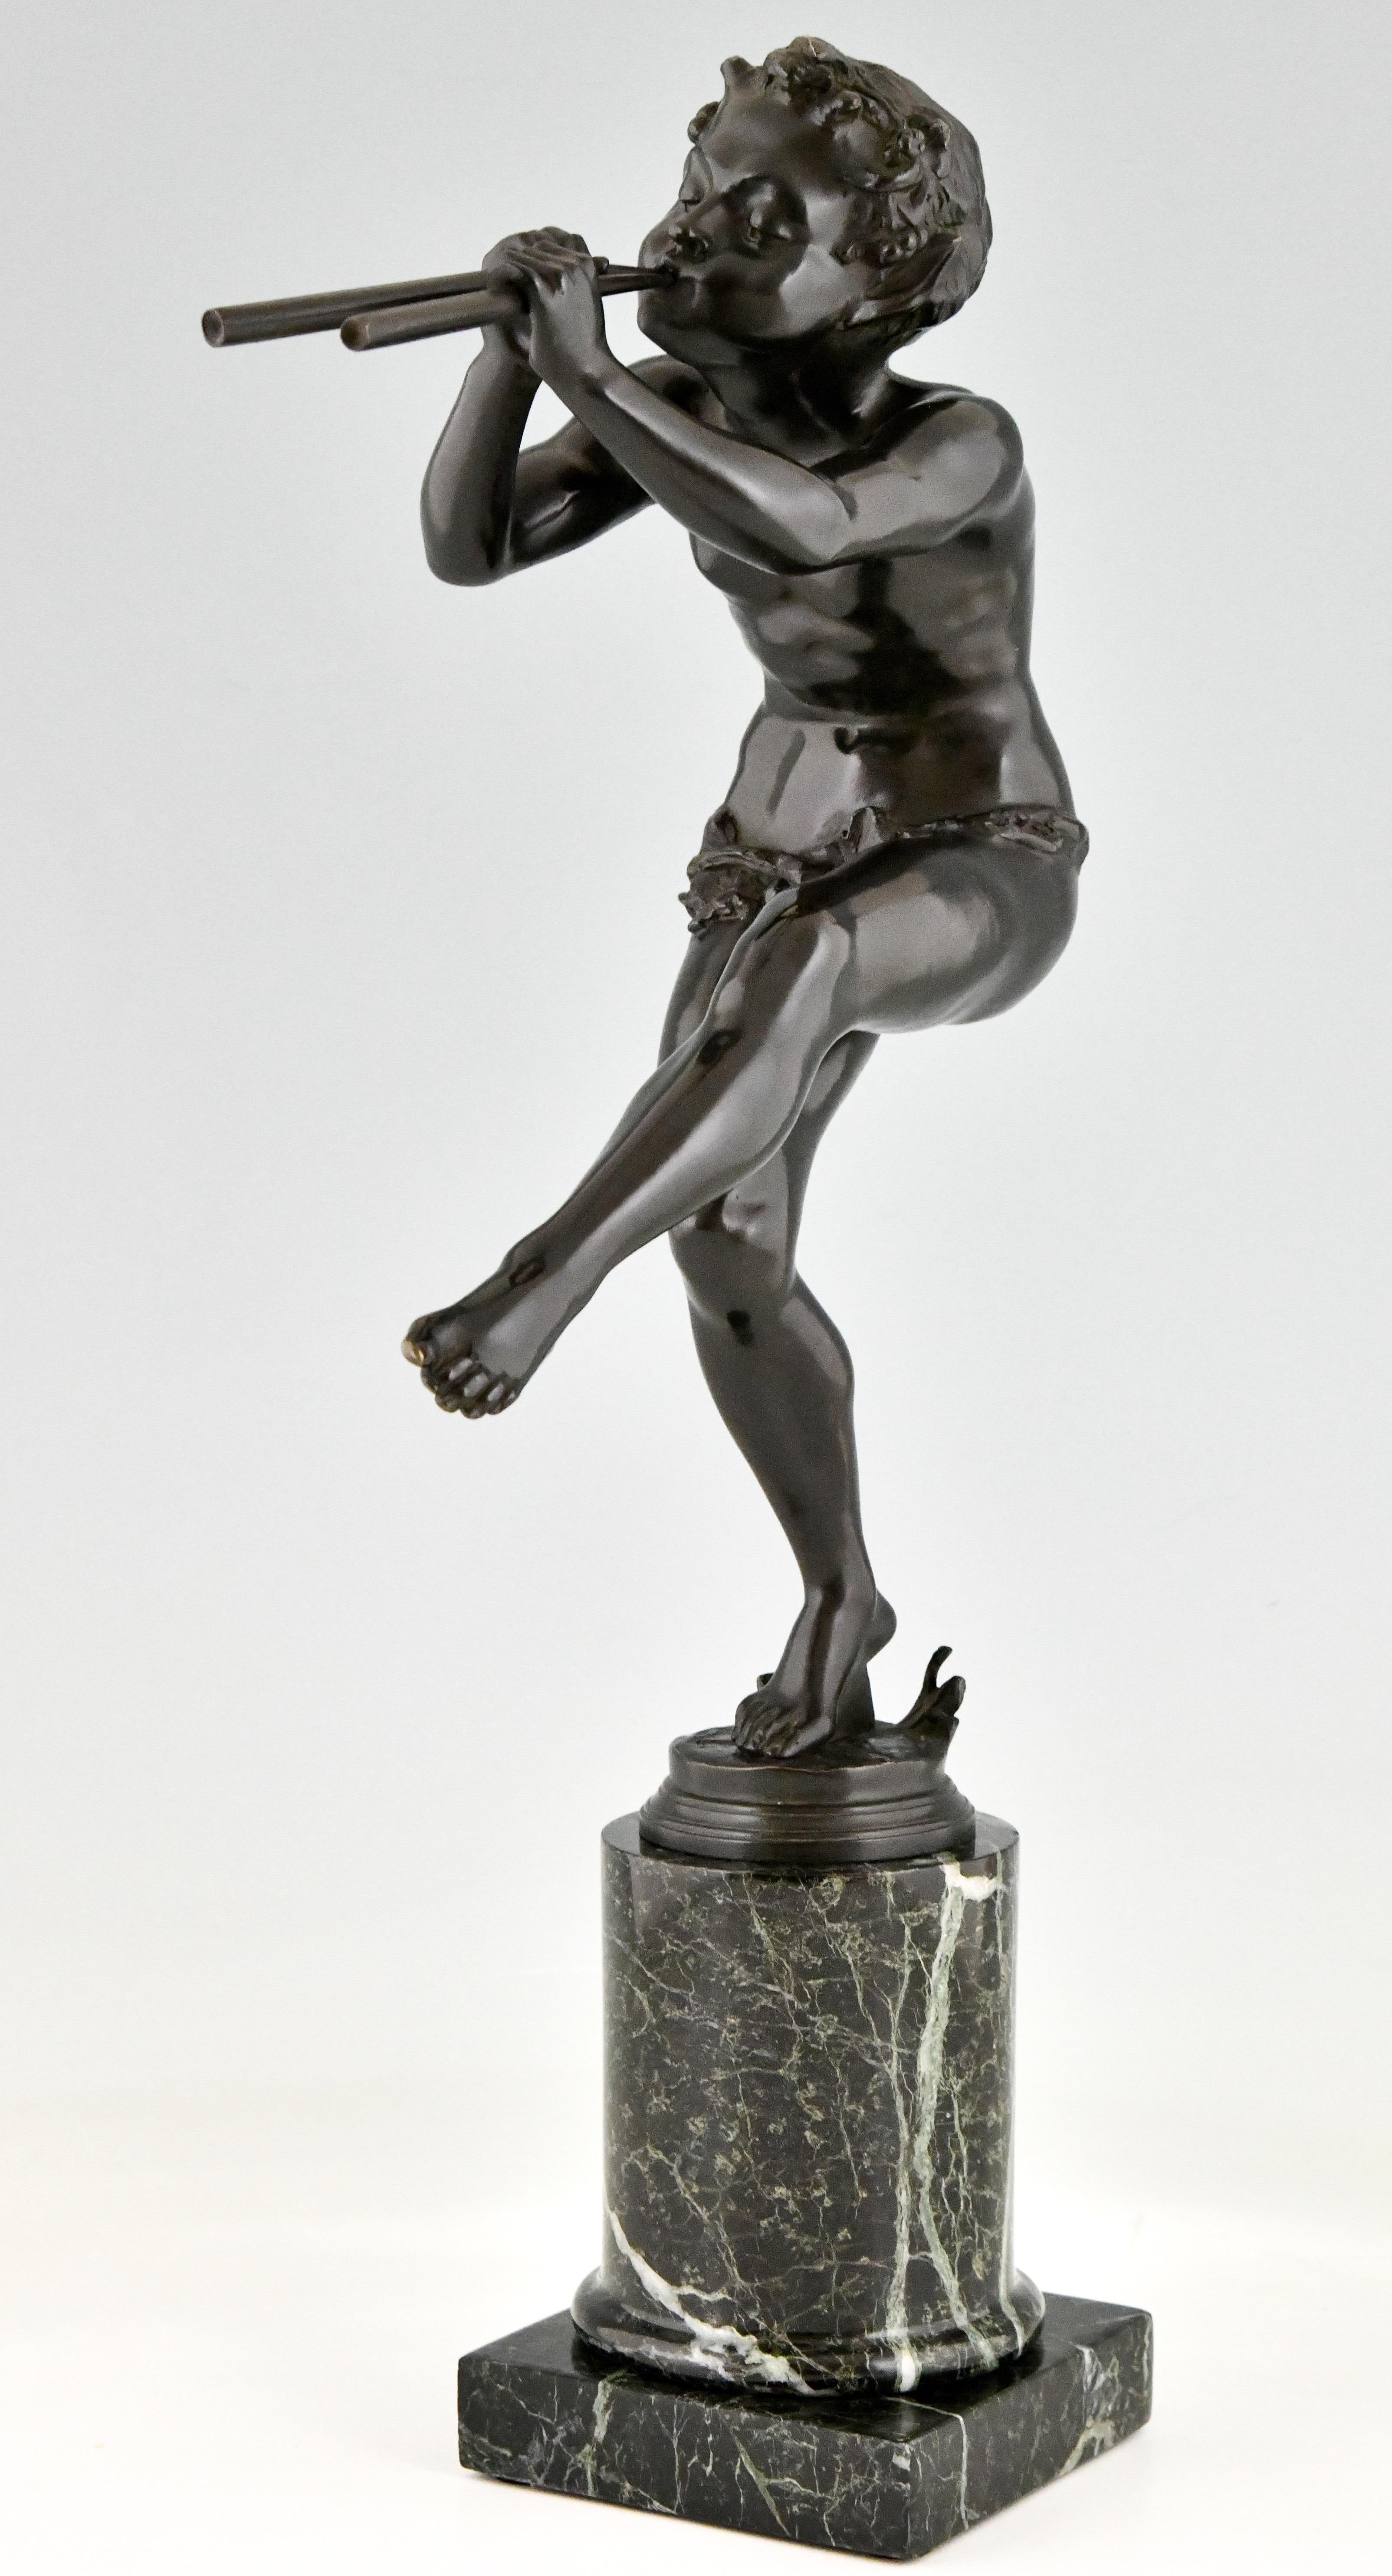 French Art Deco Bronze Sculpture Dancing Faun with Flutes by Edouard Drouot 1920